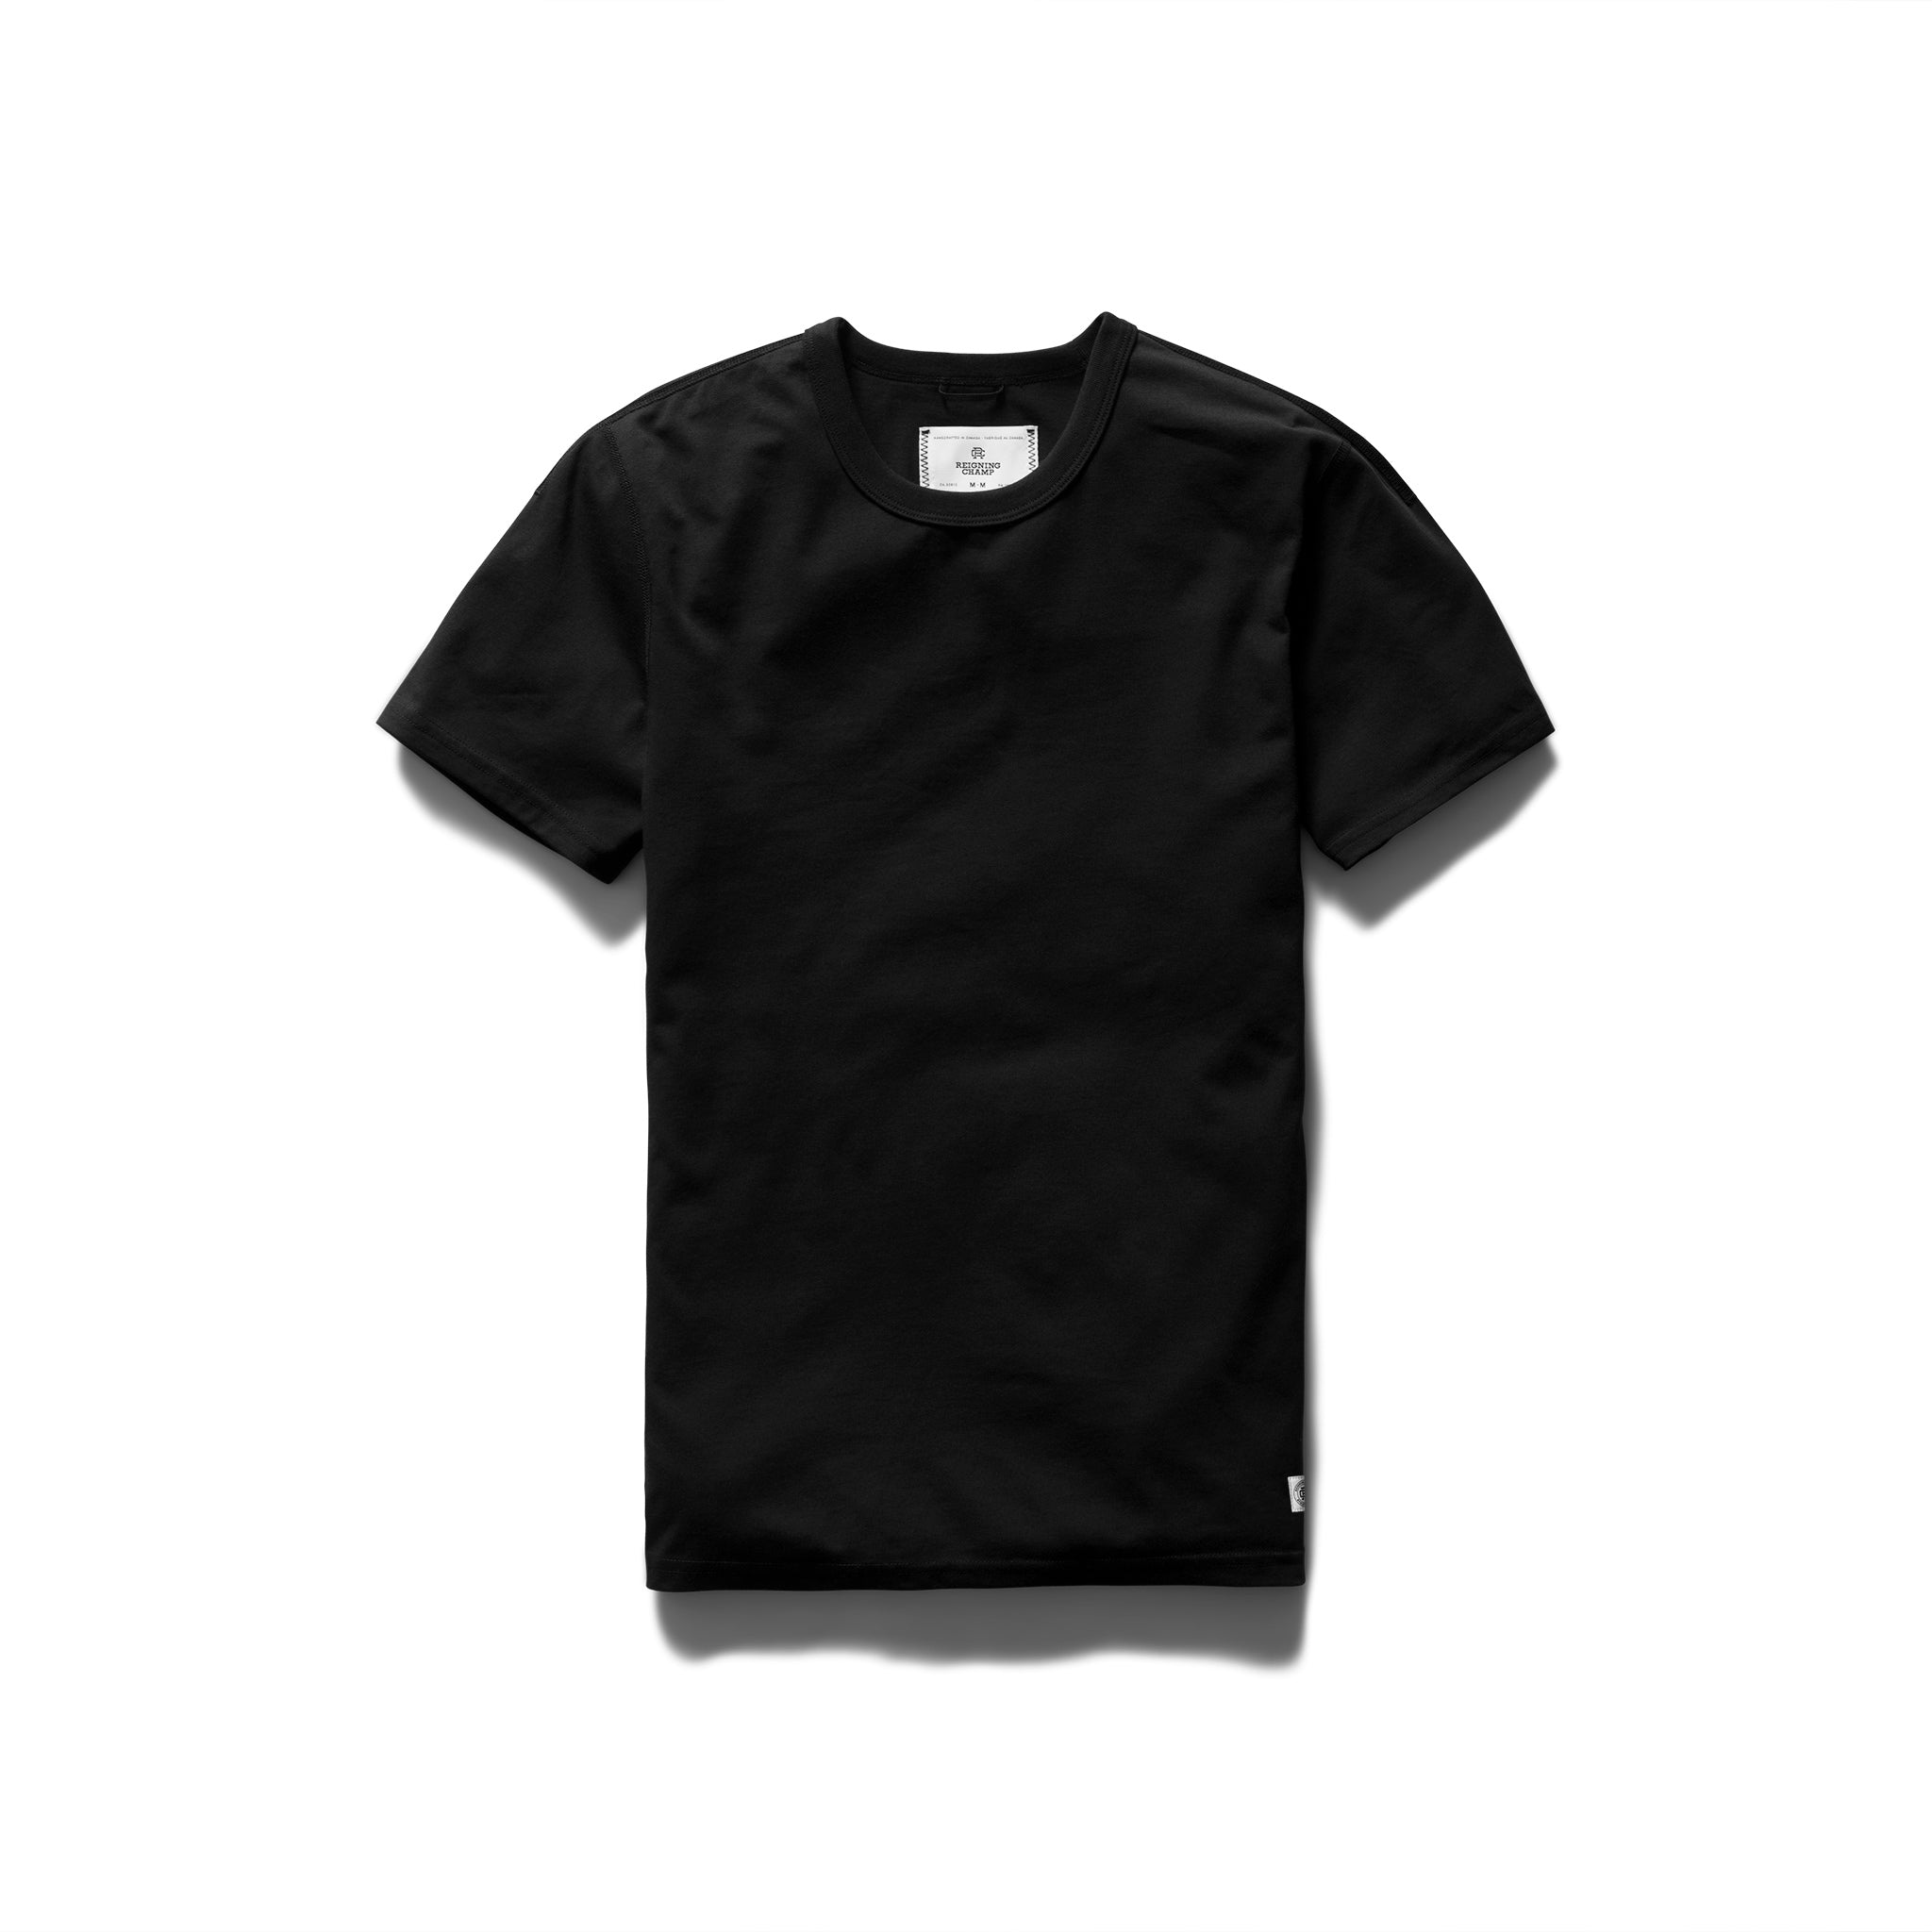 Copper Jersey T-shirt | Reigning Champ